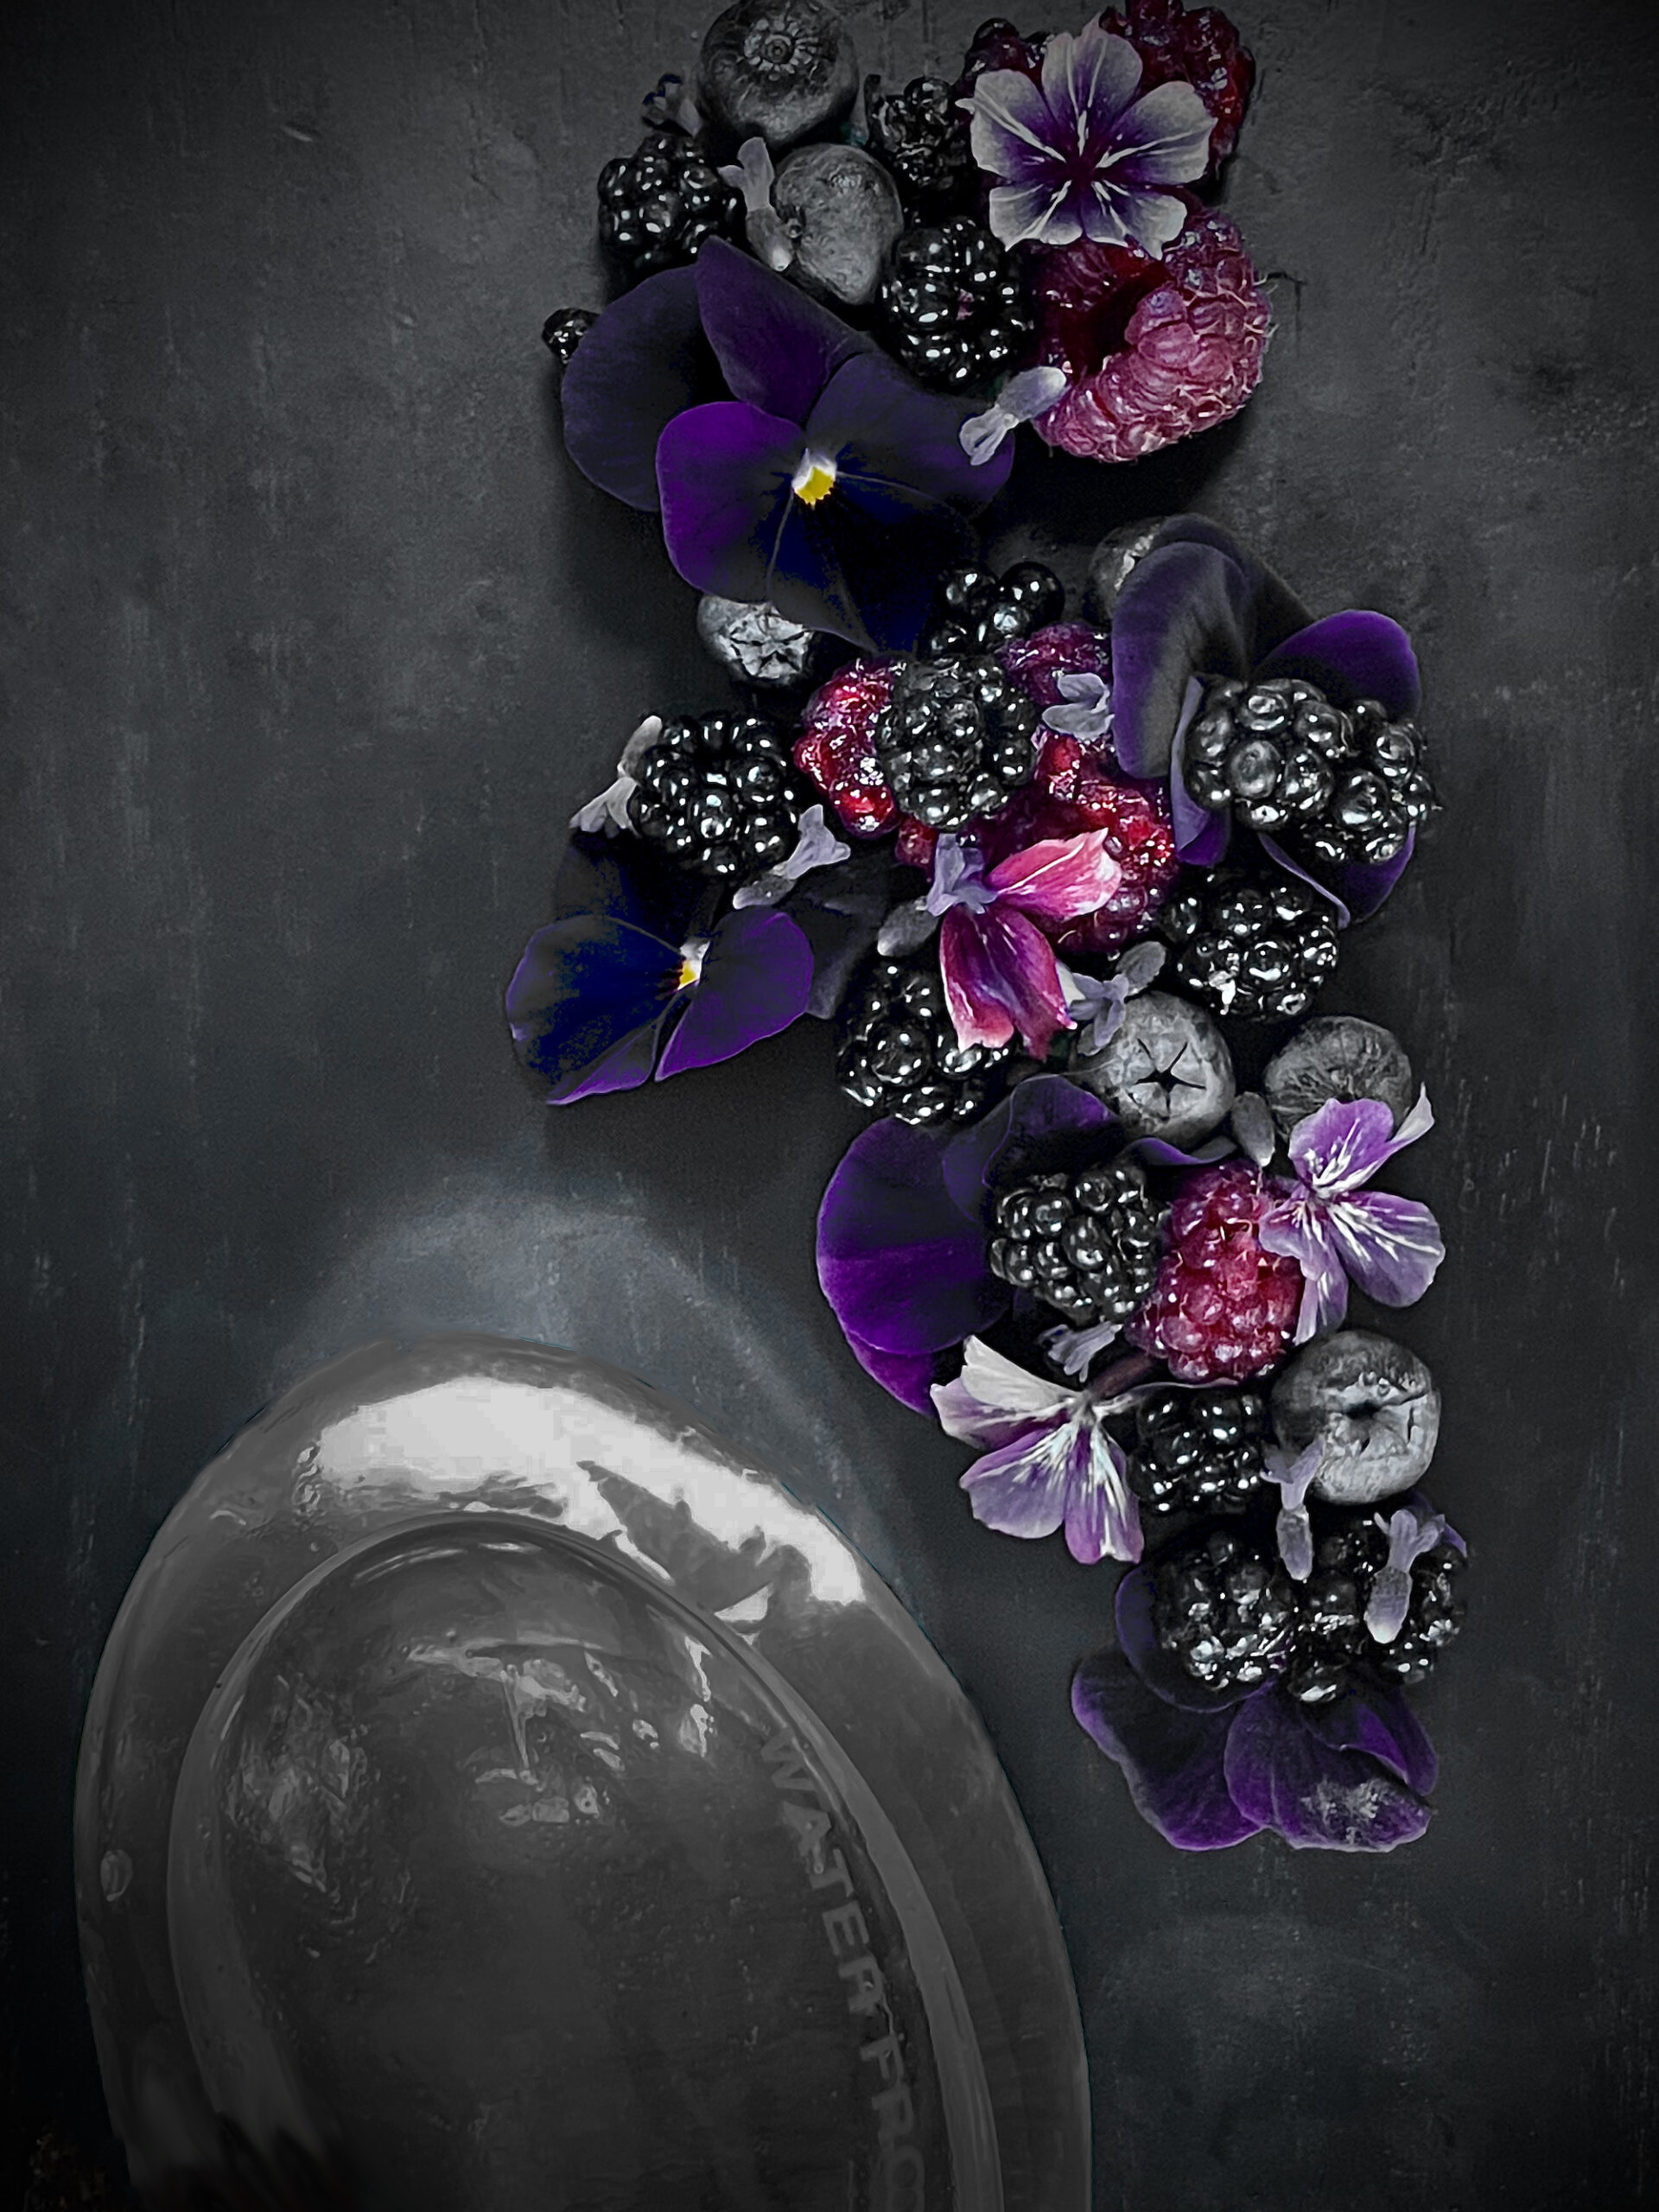 blackberry and blueberries on dark background with edible purple violas